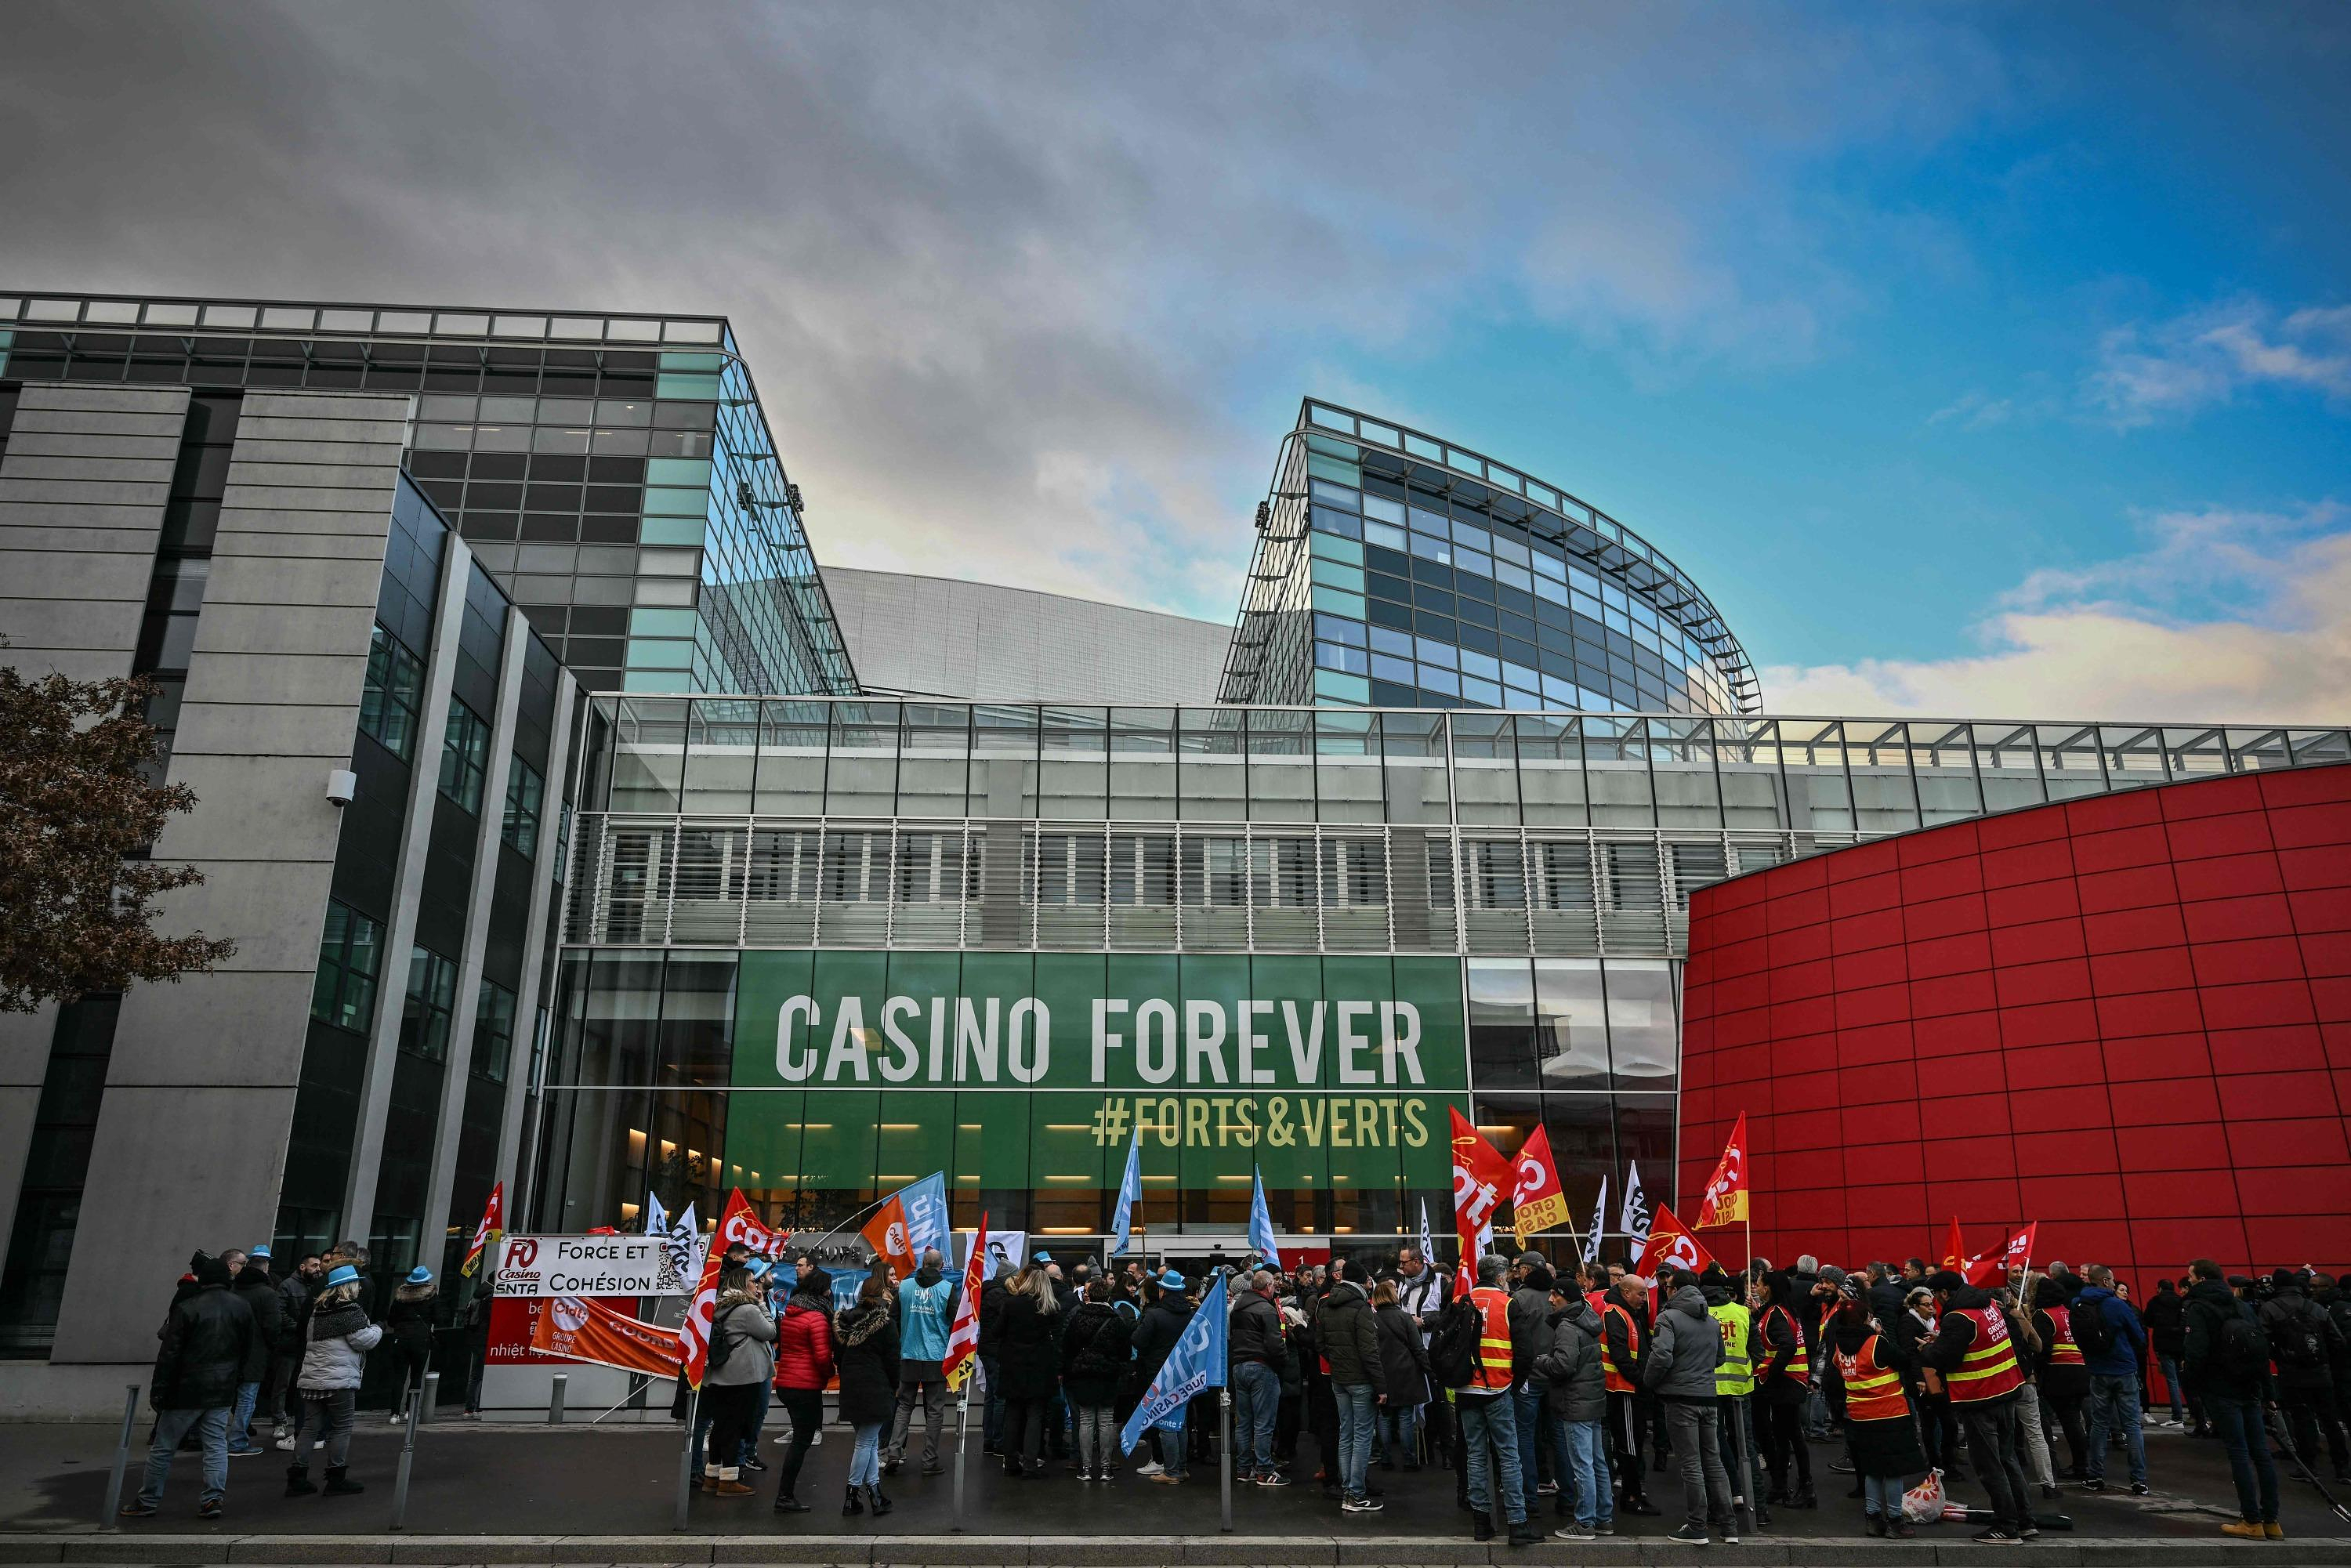 Casino: after a meeting with the buyers, the unions fear “an unprecedented social breakdown”